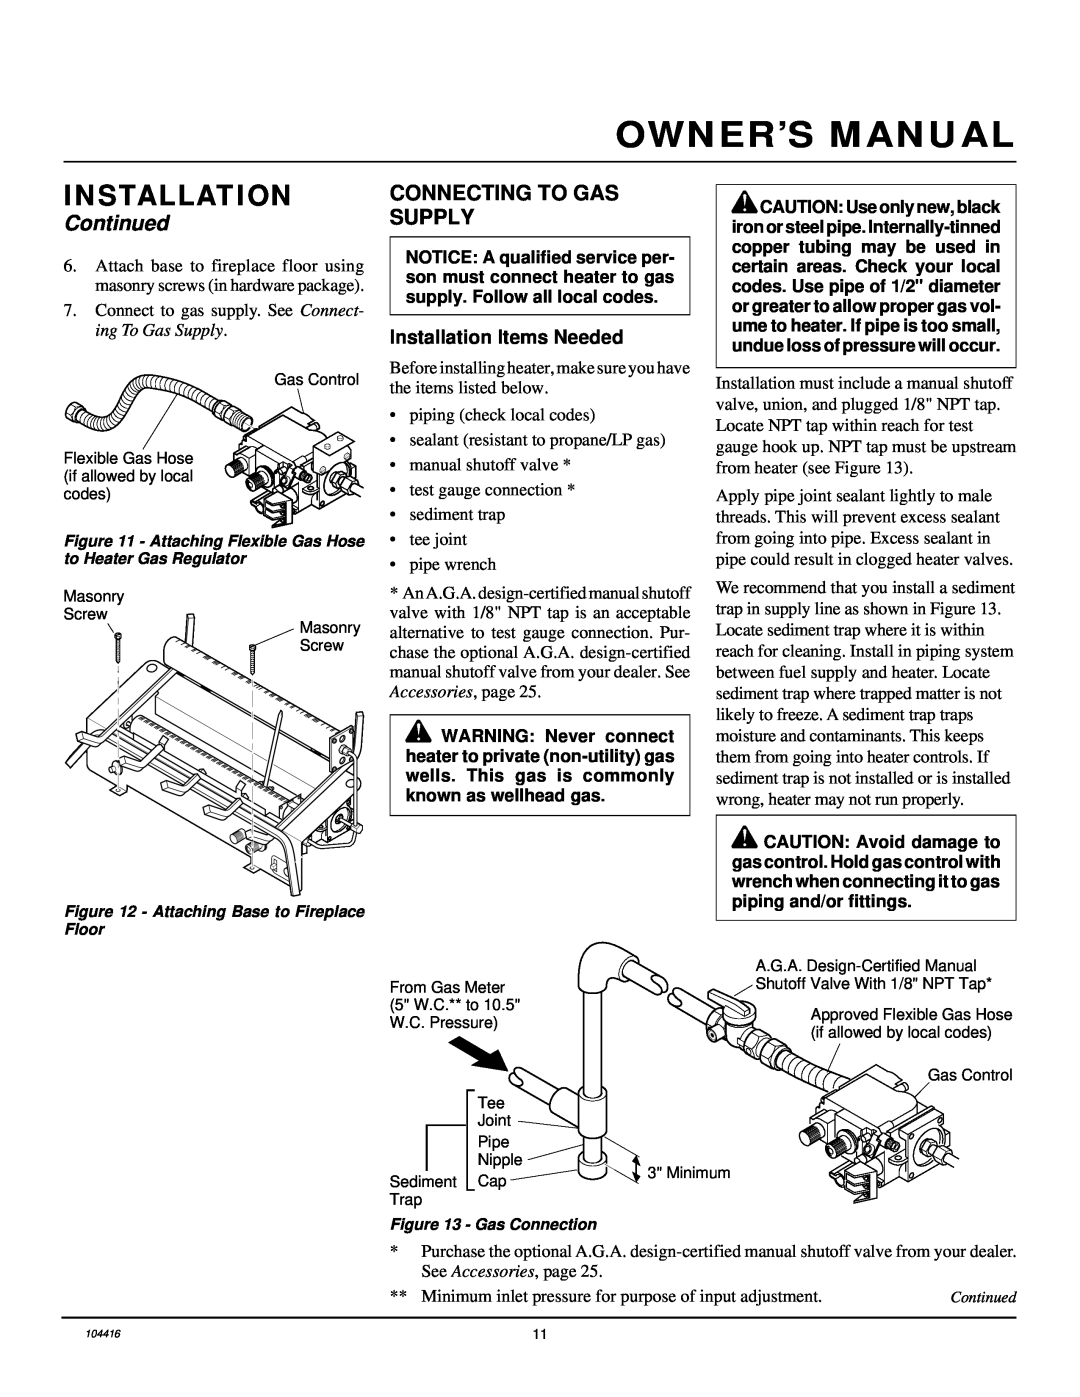 Desa VS30NRA, CFS18NRA, VS24NRA, VS18NRA installation manual Connecting To Gas Supply, Installation, Continued 